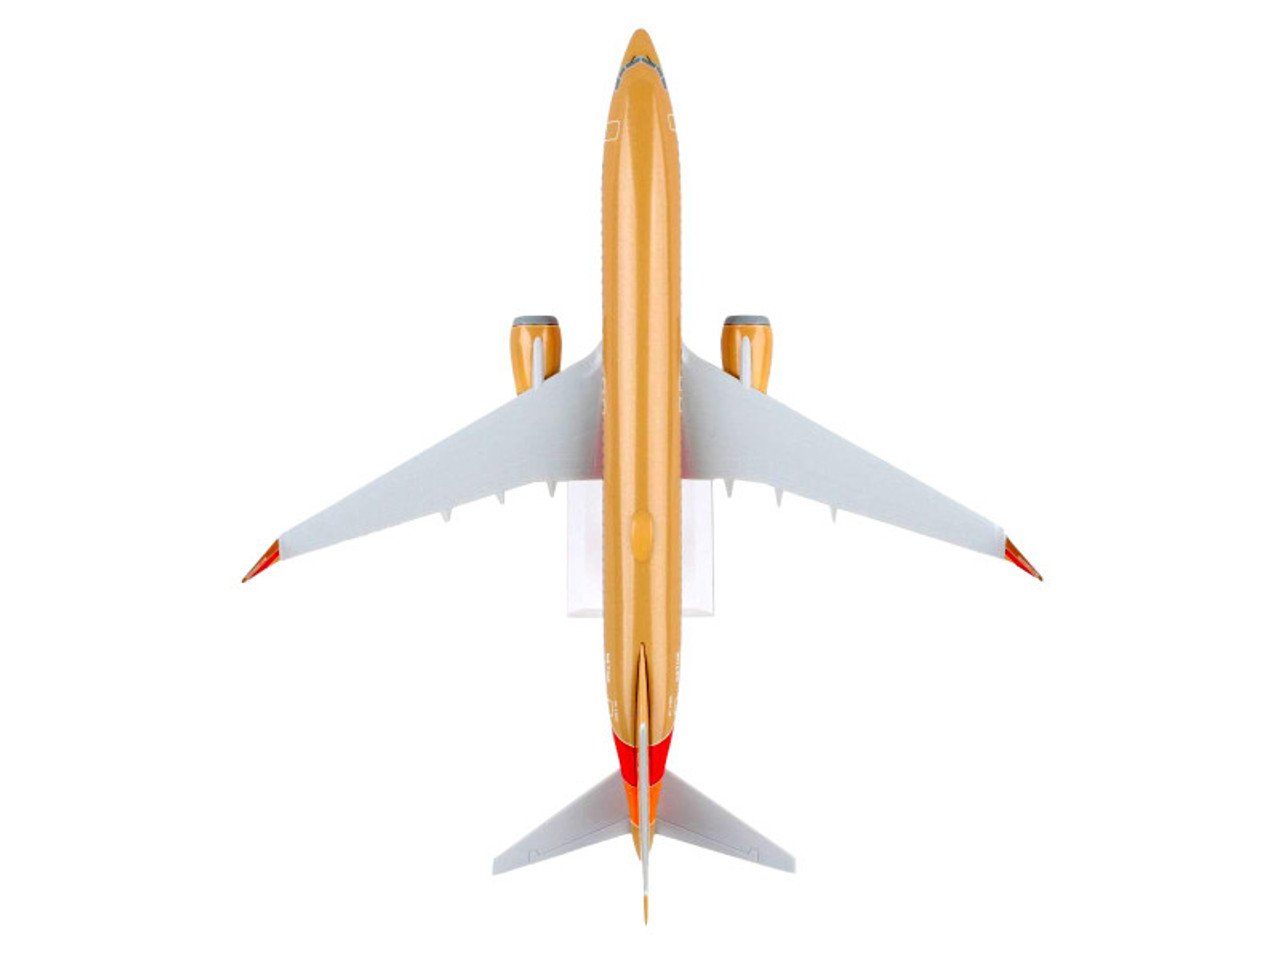 Boeing 737 MAX 8 Commercial Aircraft "Southwest Airlines" (N572UP) Tan with Red and Orange Stripes (Snap-Fit) 1/130 Plastic Model by Skymarks